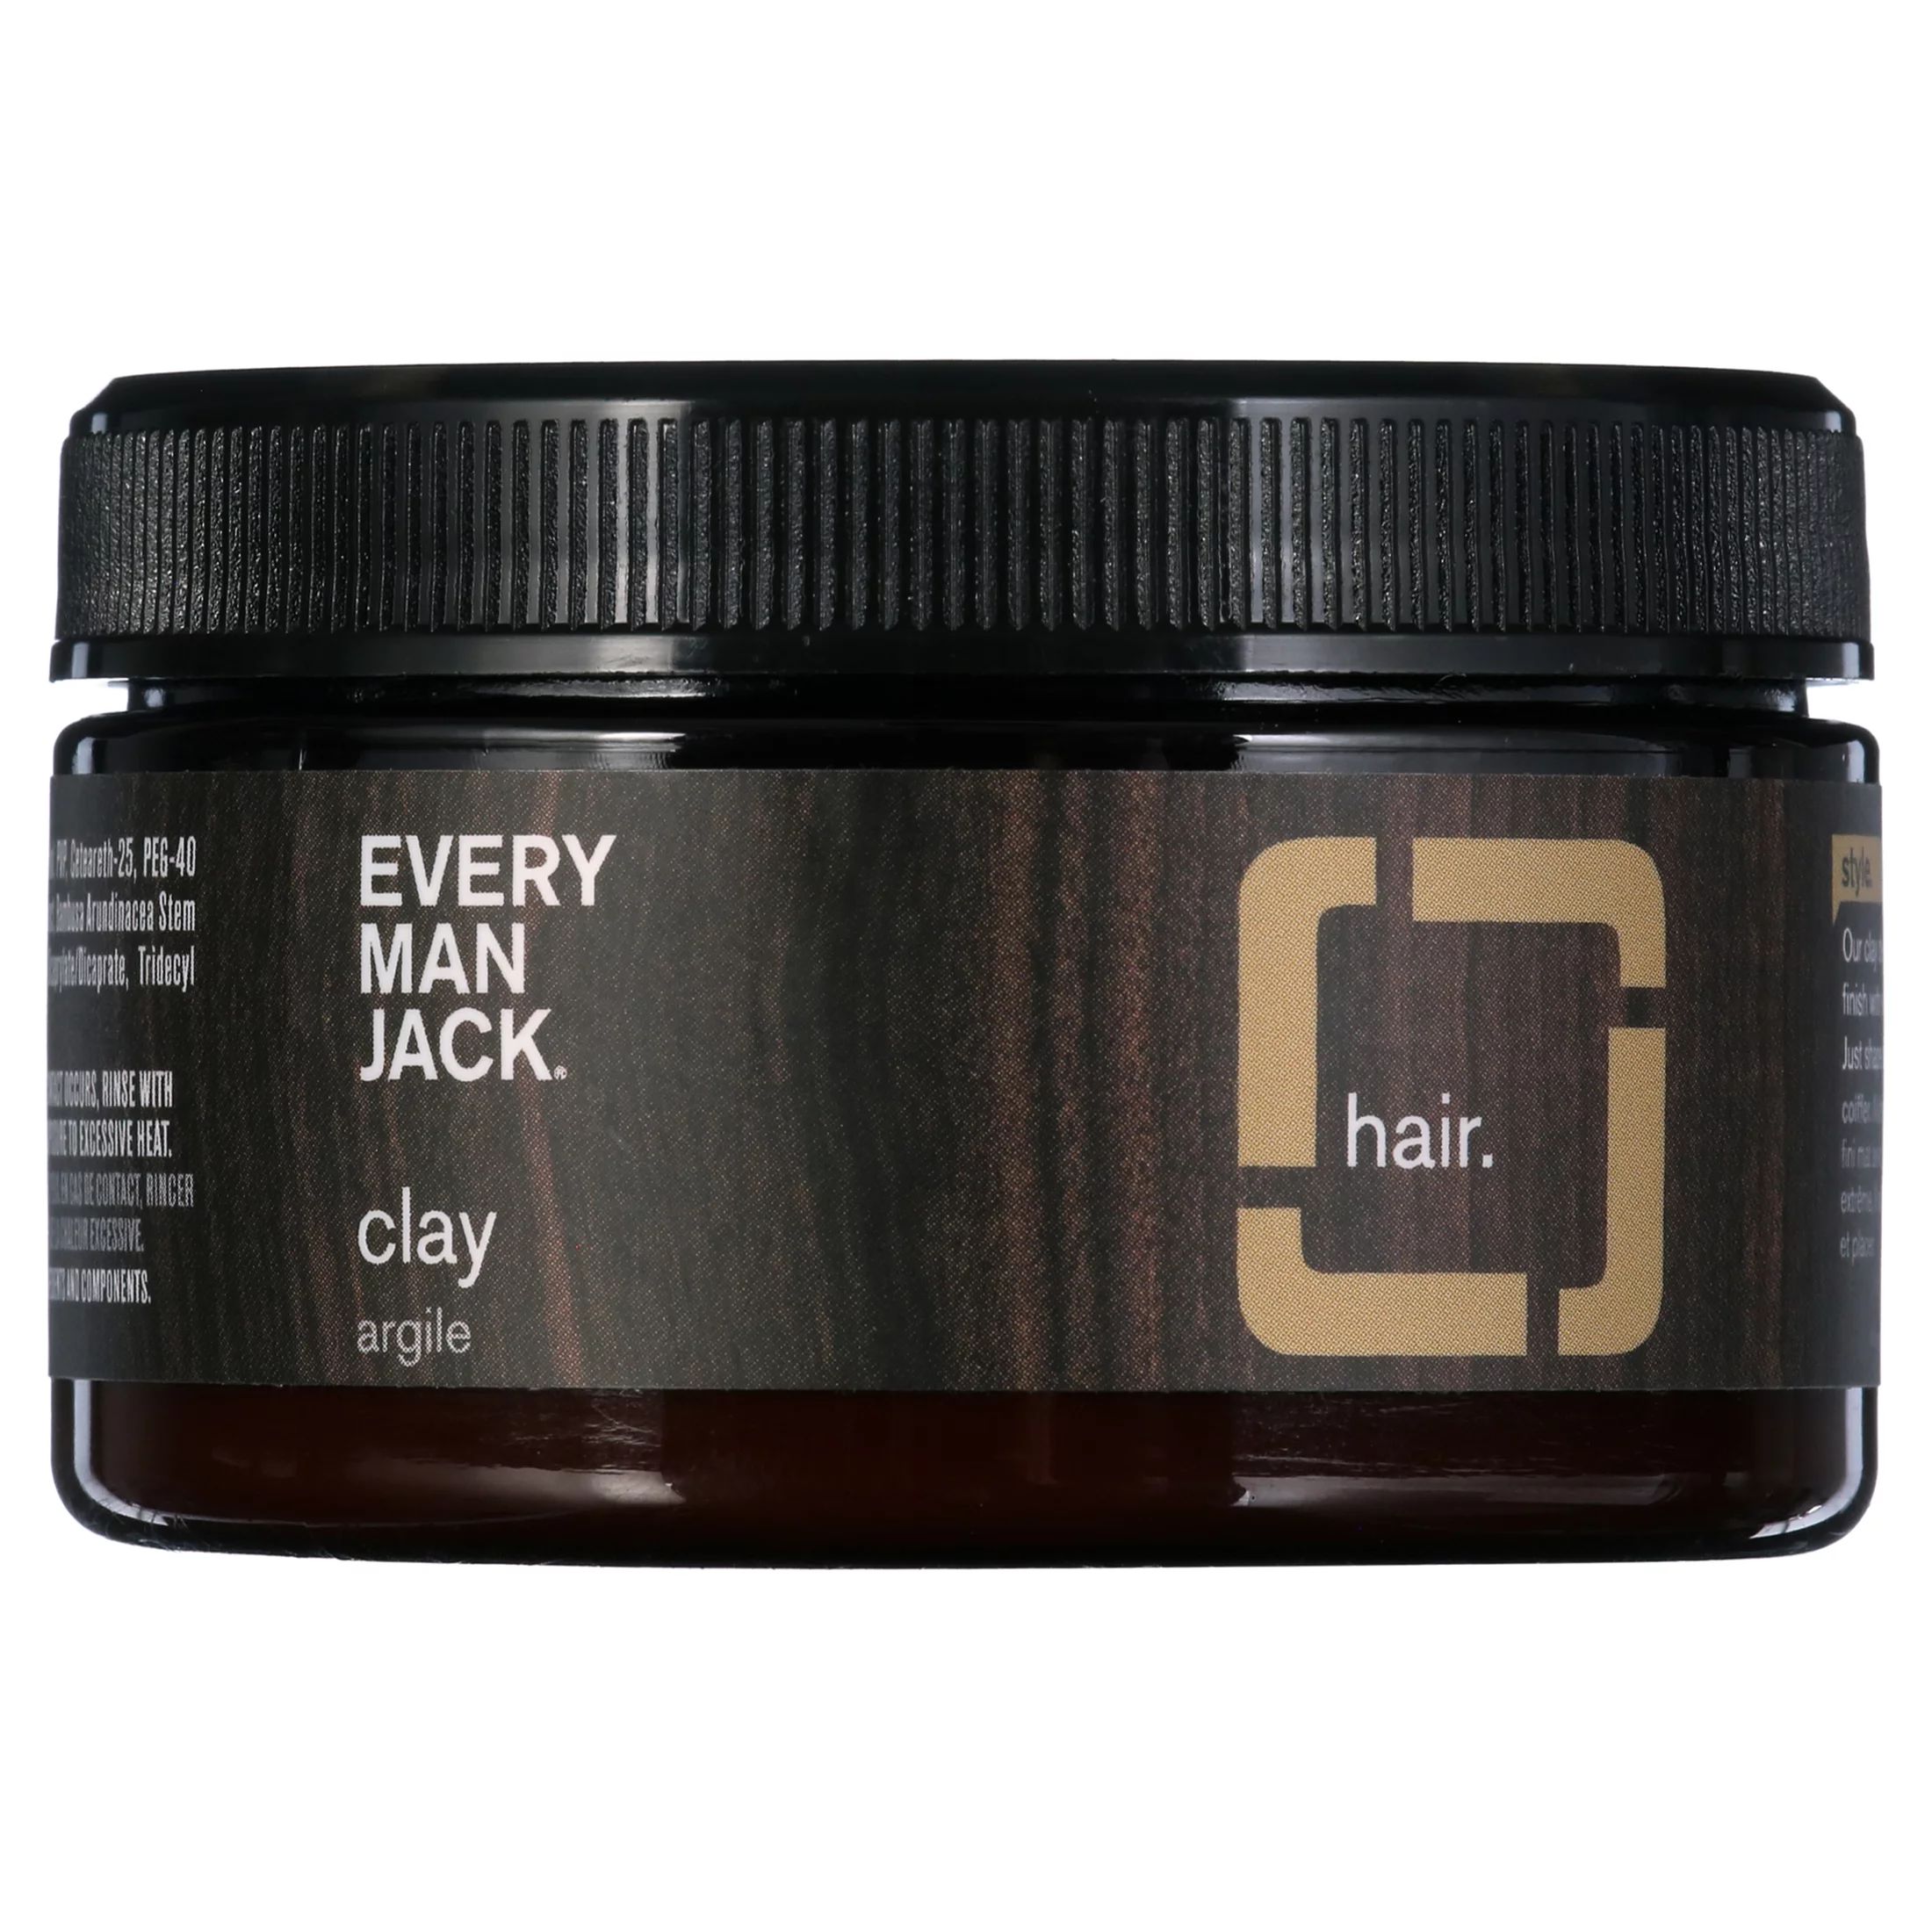 Every Man Jack Matte Finish Hair Styling Clay for Men, Naturally Derived, 3.4 oz | Walmart (US)